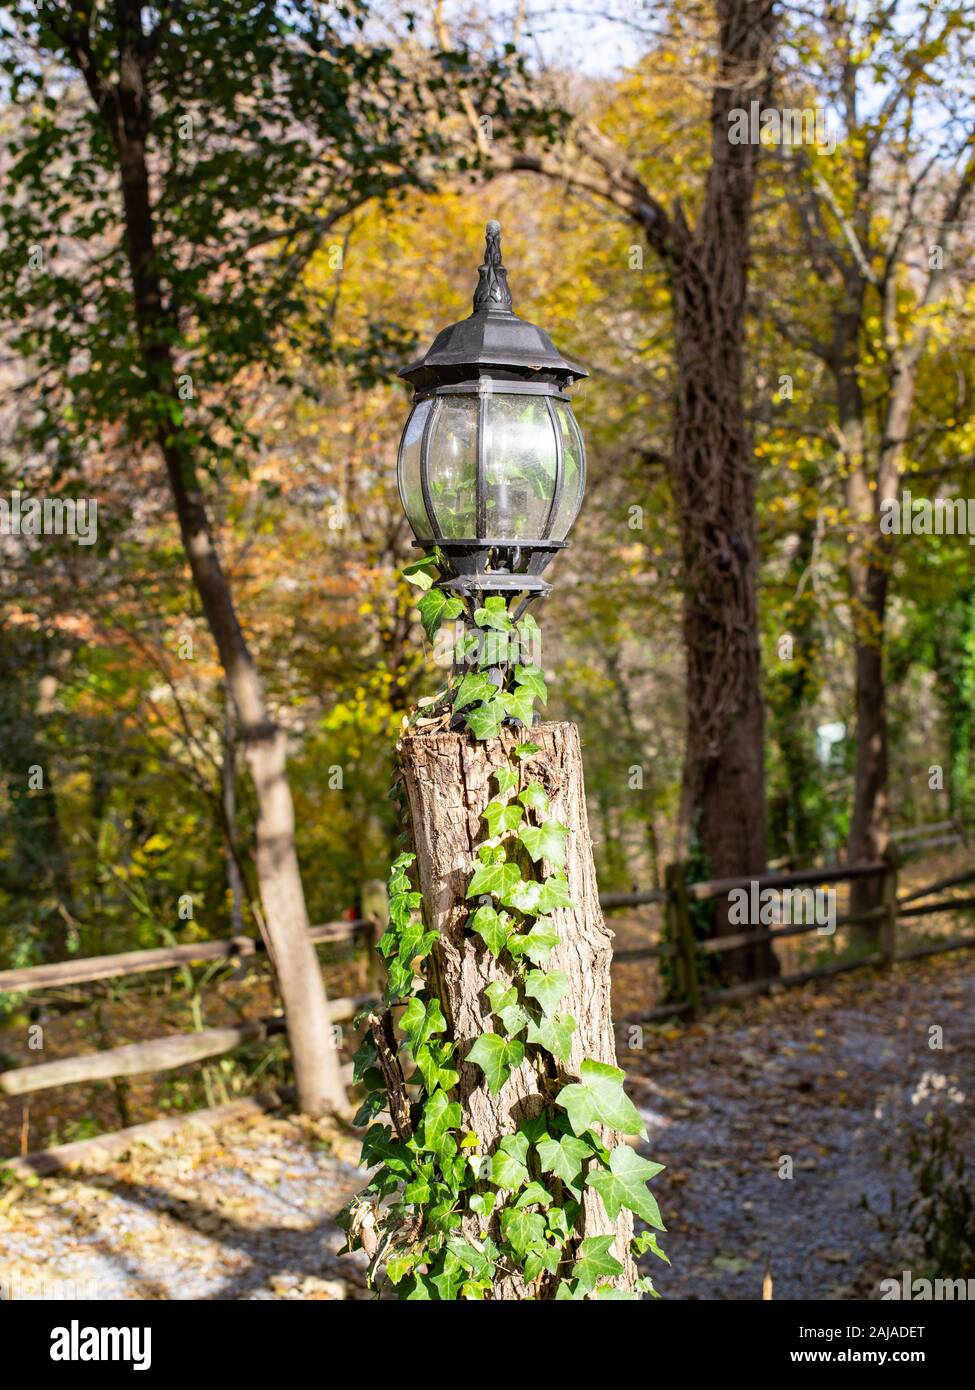 A green leaf Vine Snakes up a Lamp Post and Into the Lamp Stock Photo